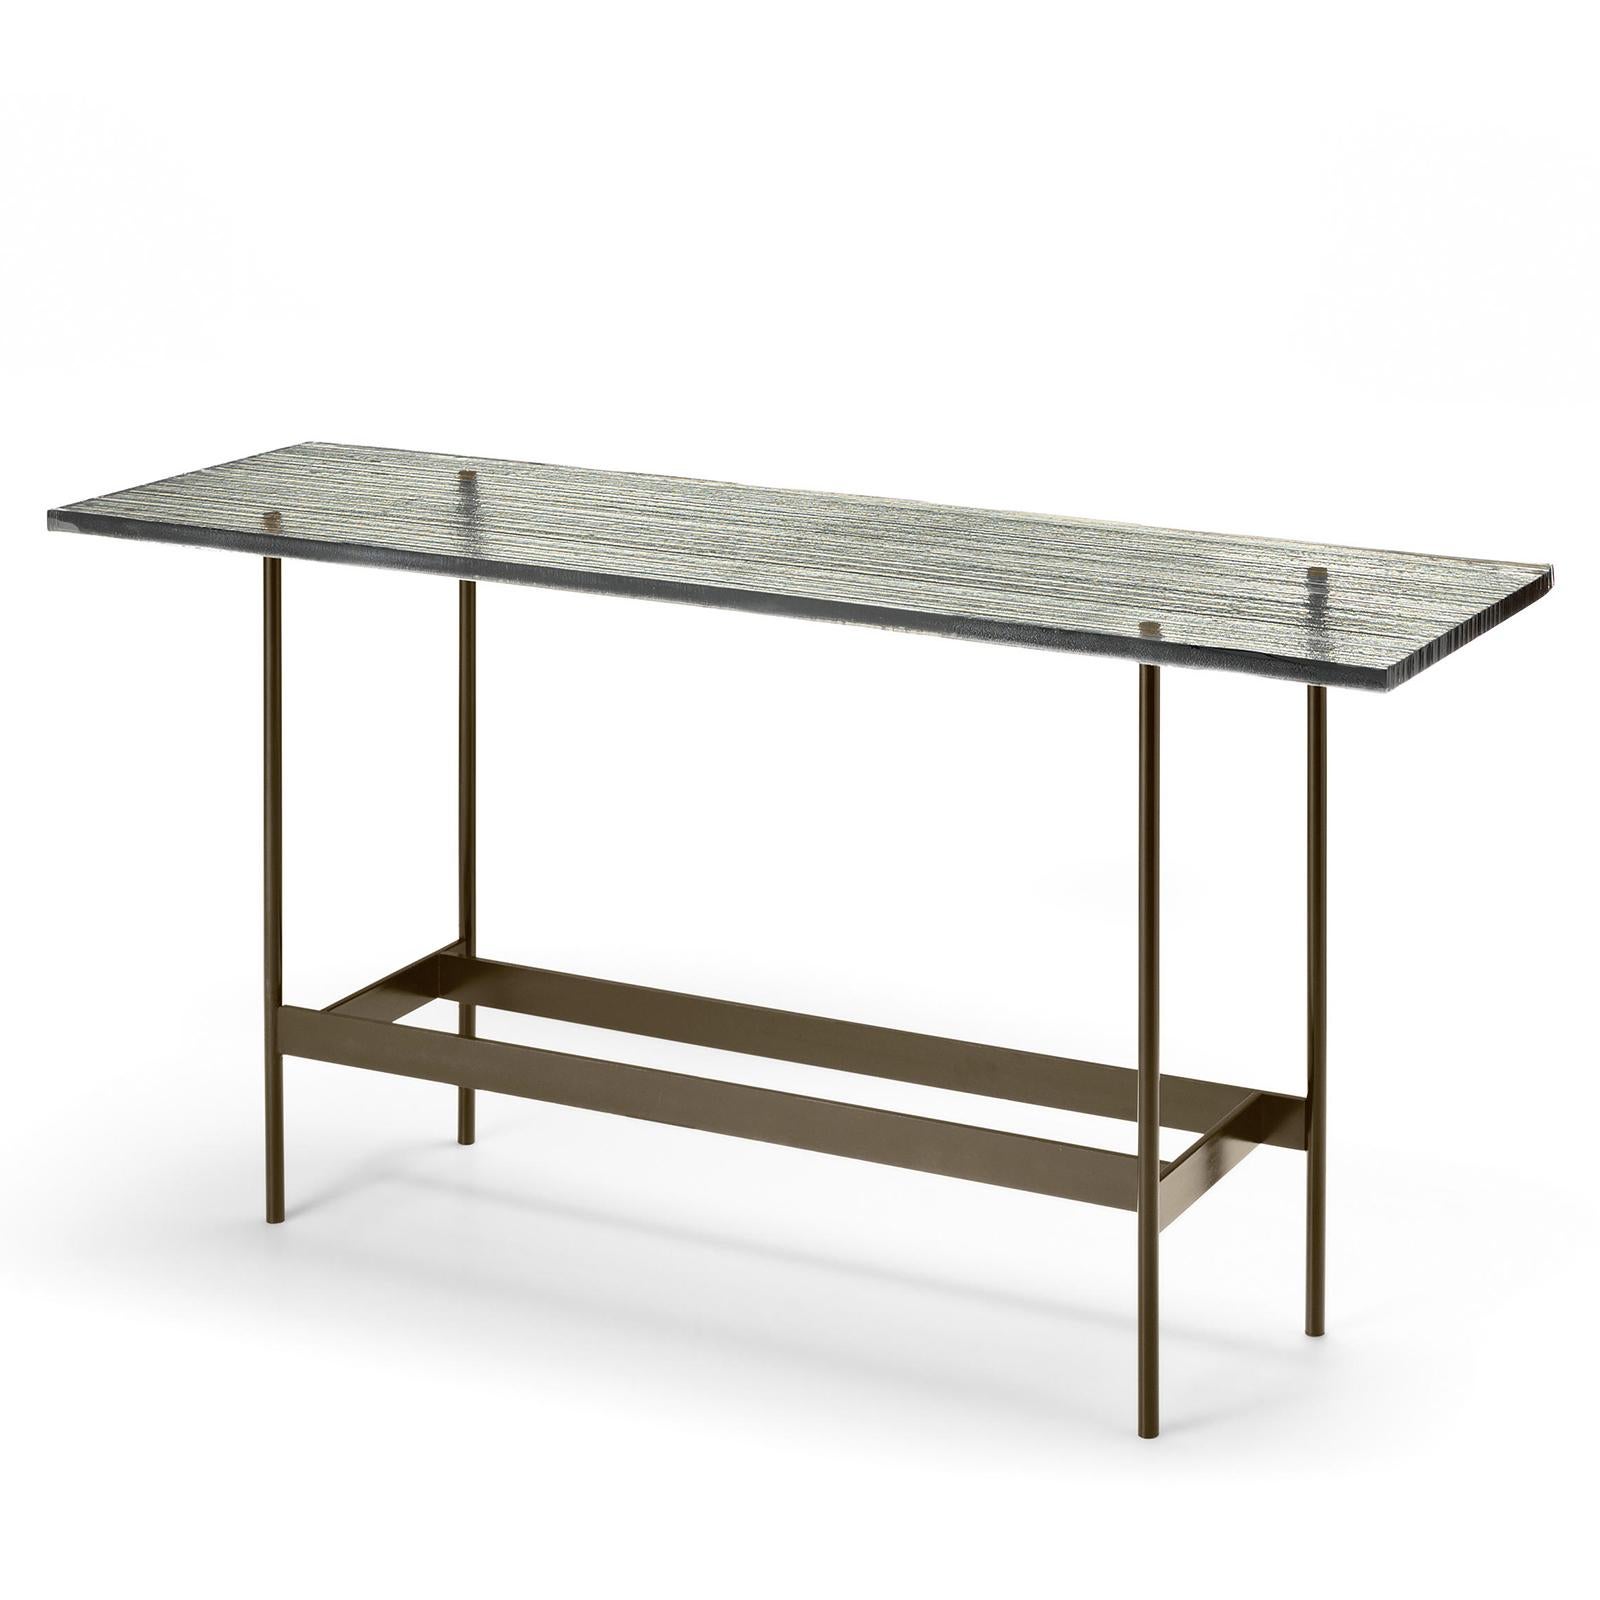 Console table lines glass top with 23mm thickness
colored striped glass top. On opaque titanium base.
Also available with 23mm thickness clear glass top.
Available in: 
L 120 x D 45 x H 75cm, price: 4400,00€
L 150 x D 45 x H 75cm, price: 4900,00€.